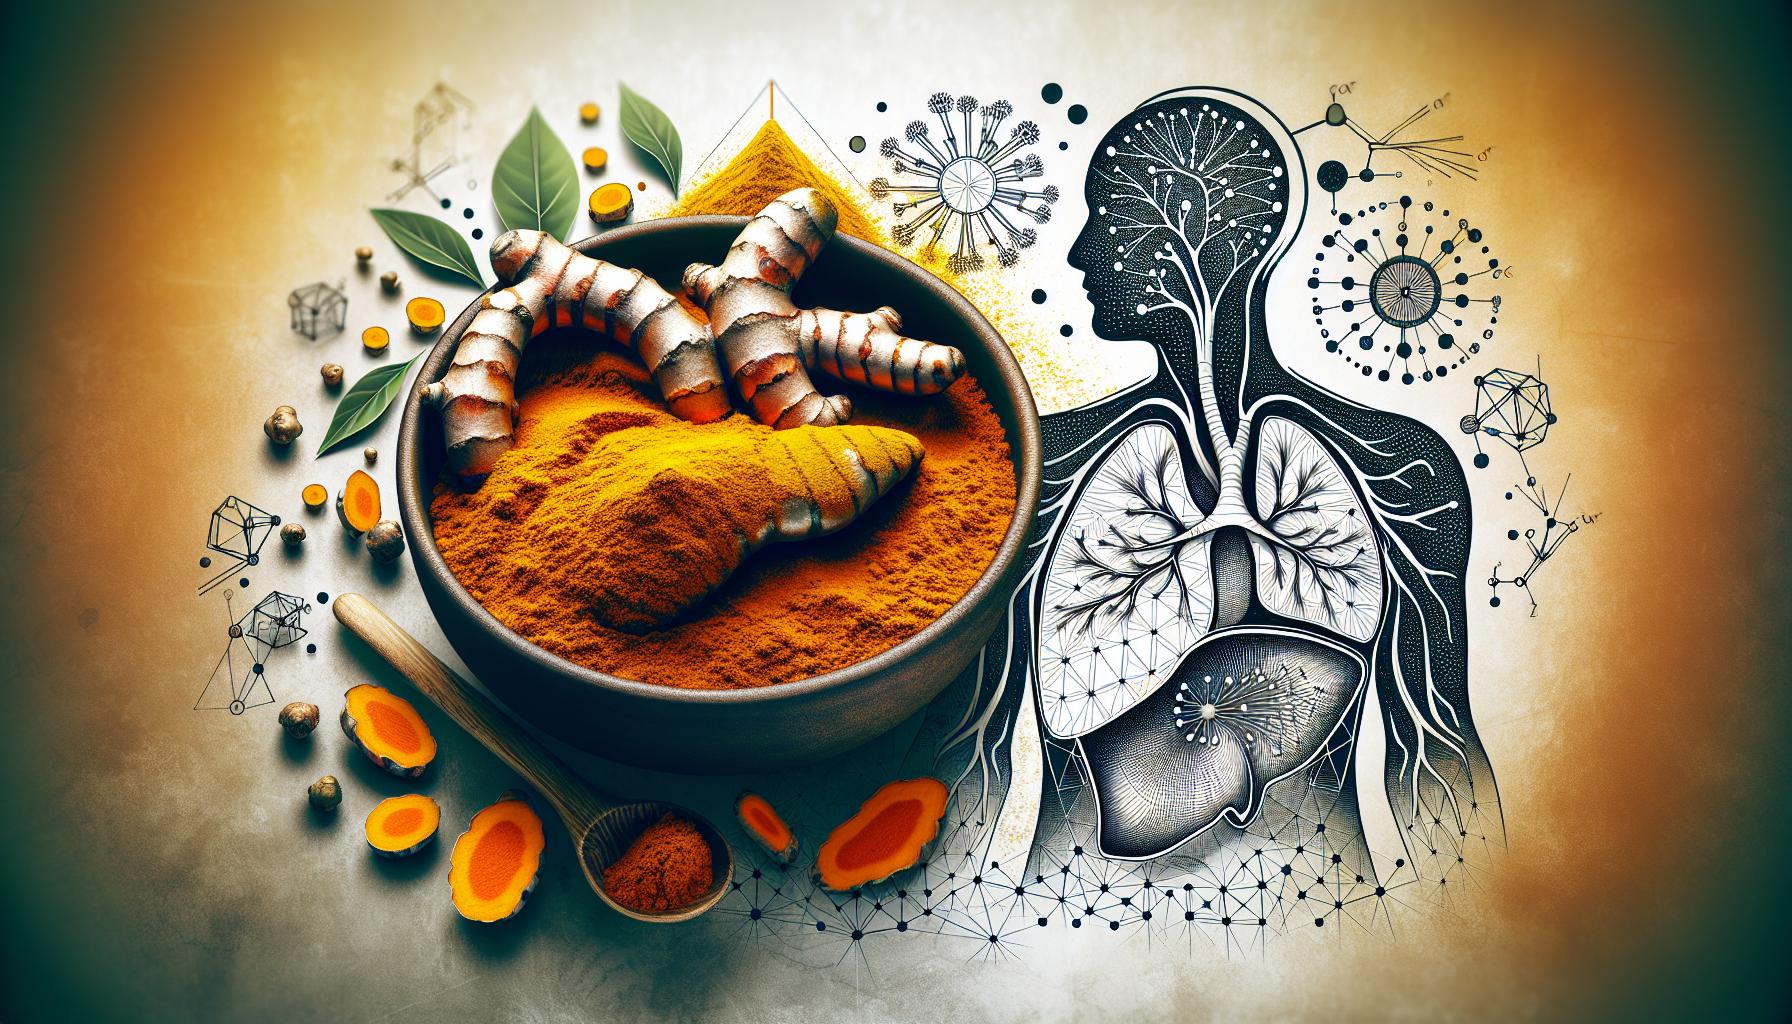 How To Use Turmeric For Fatty Liver